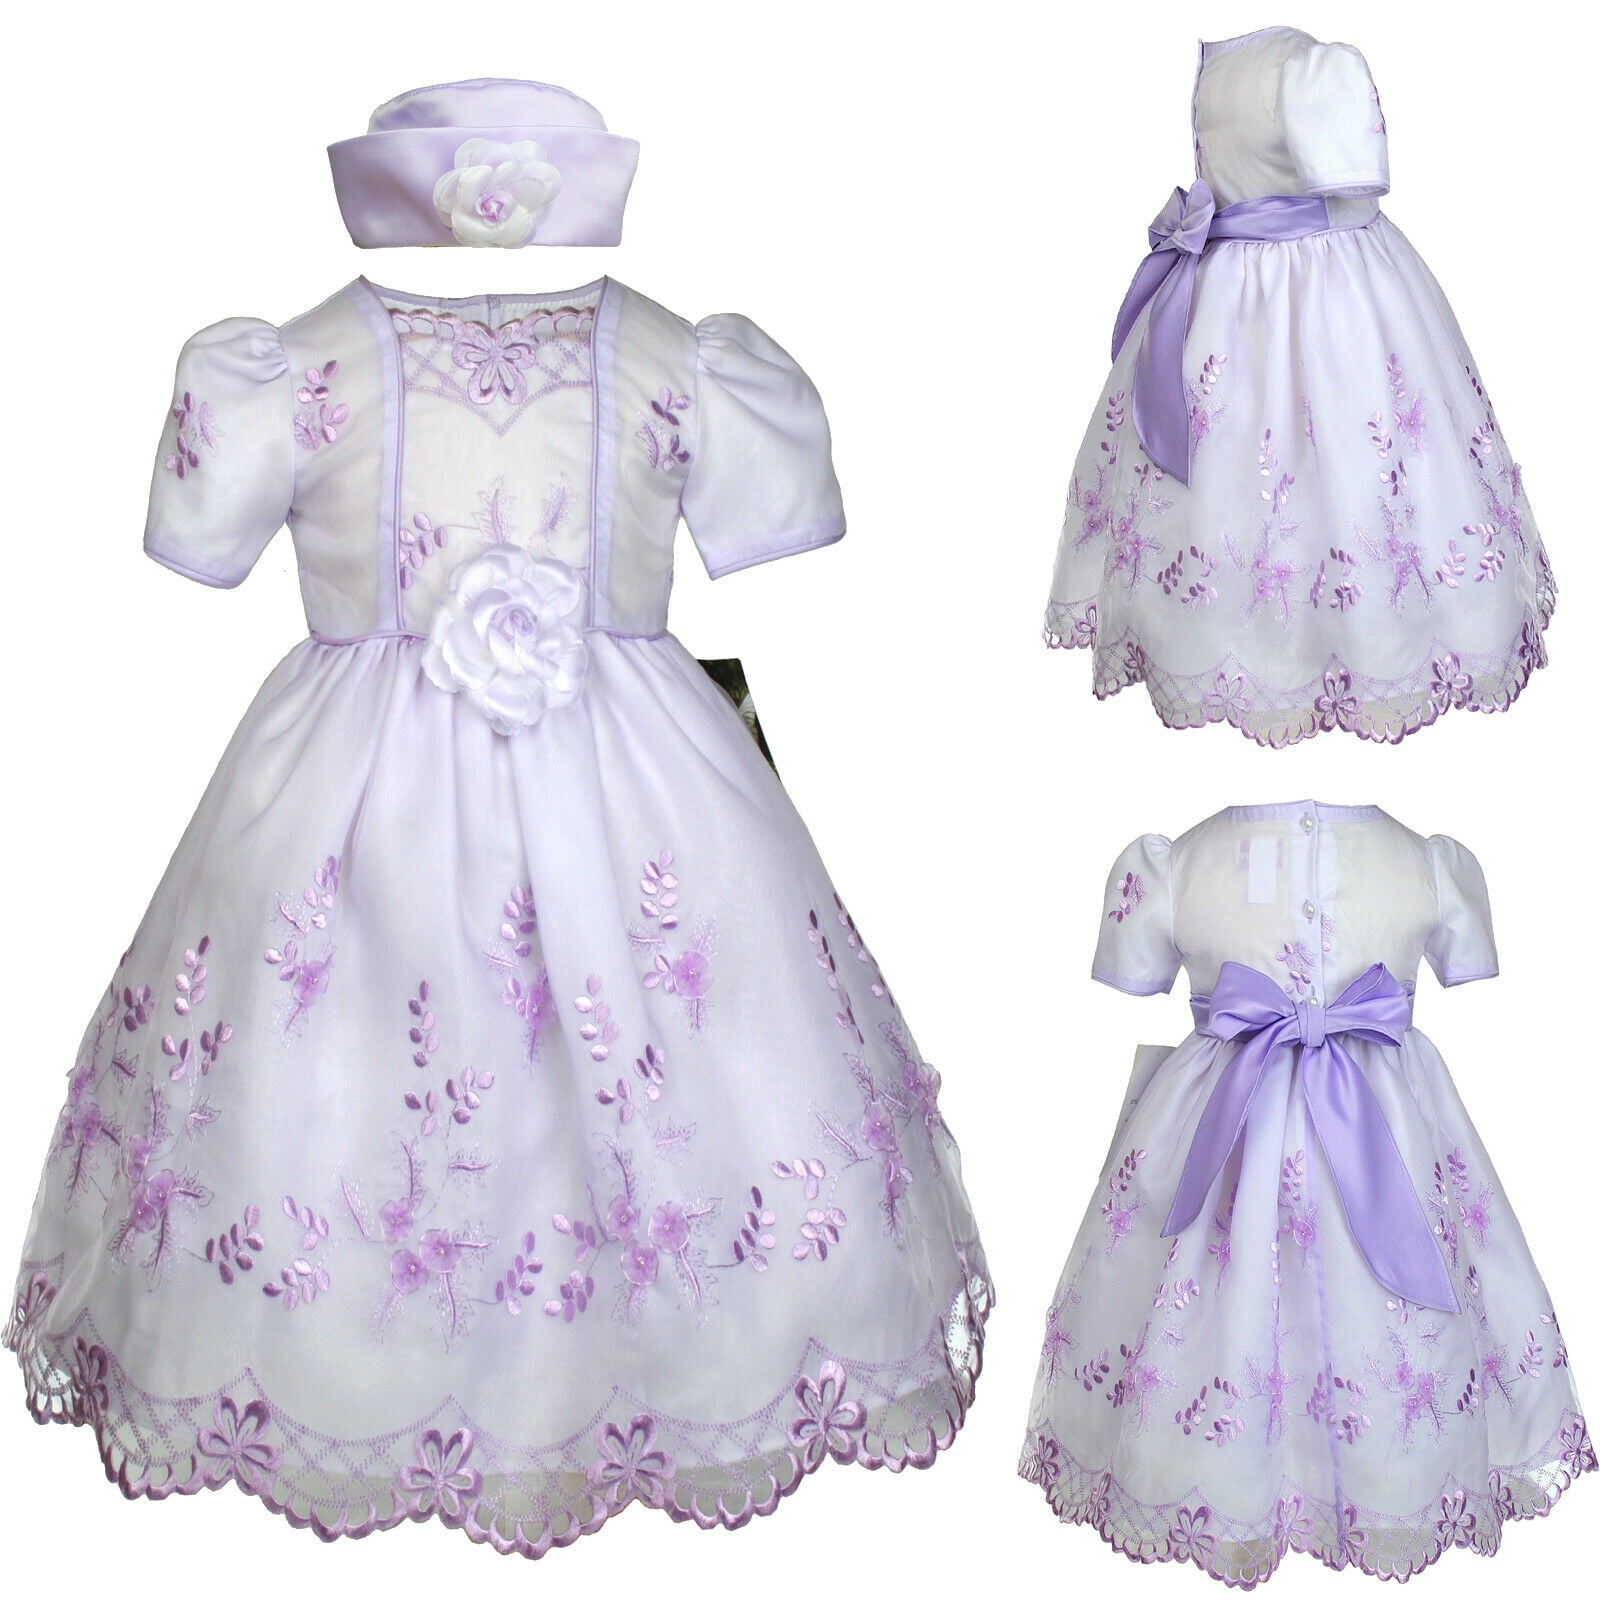 Baby Girl Toddler Wedding Easter Baptism Formal Party Lilac Dress S-XL 0-36 M 